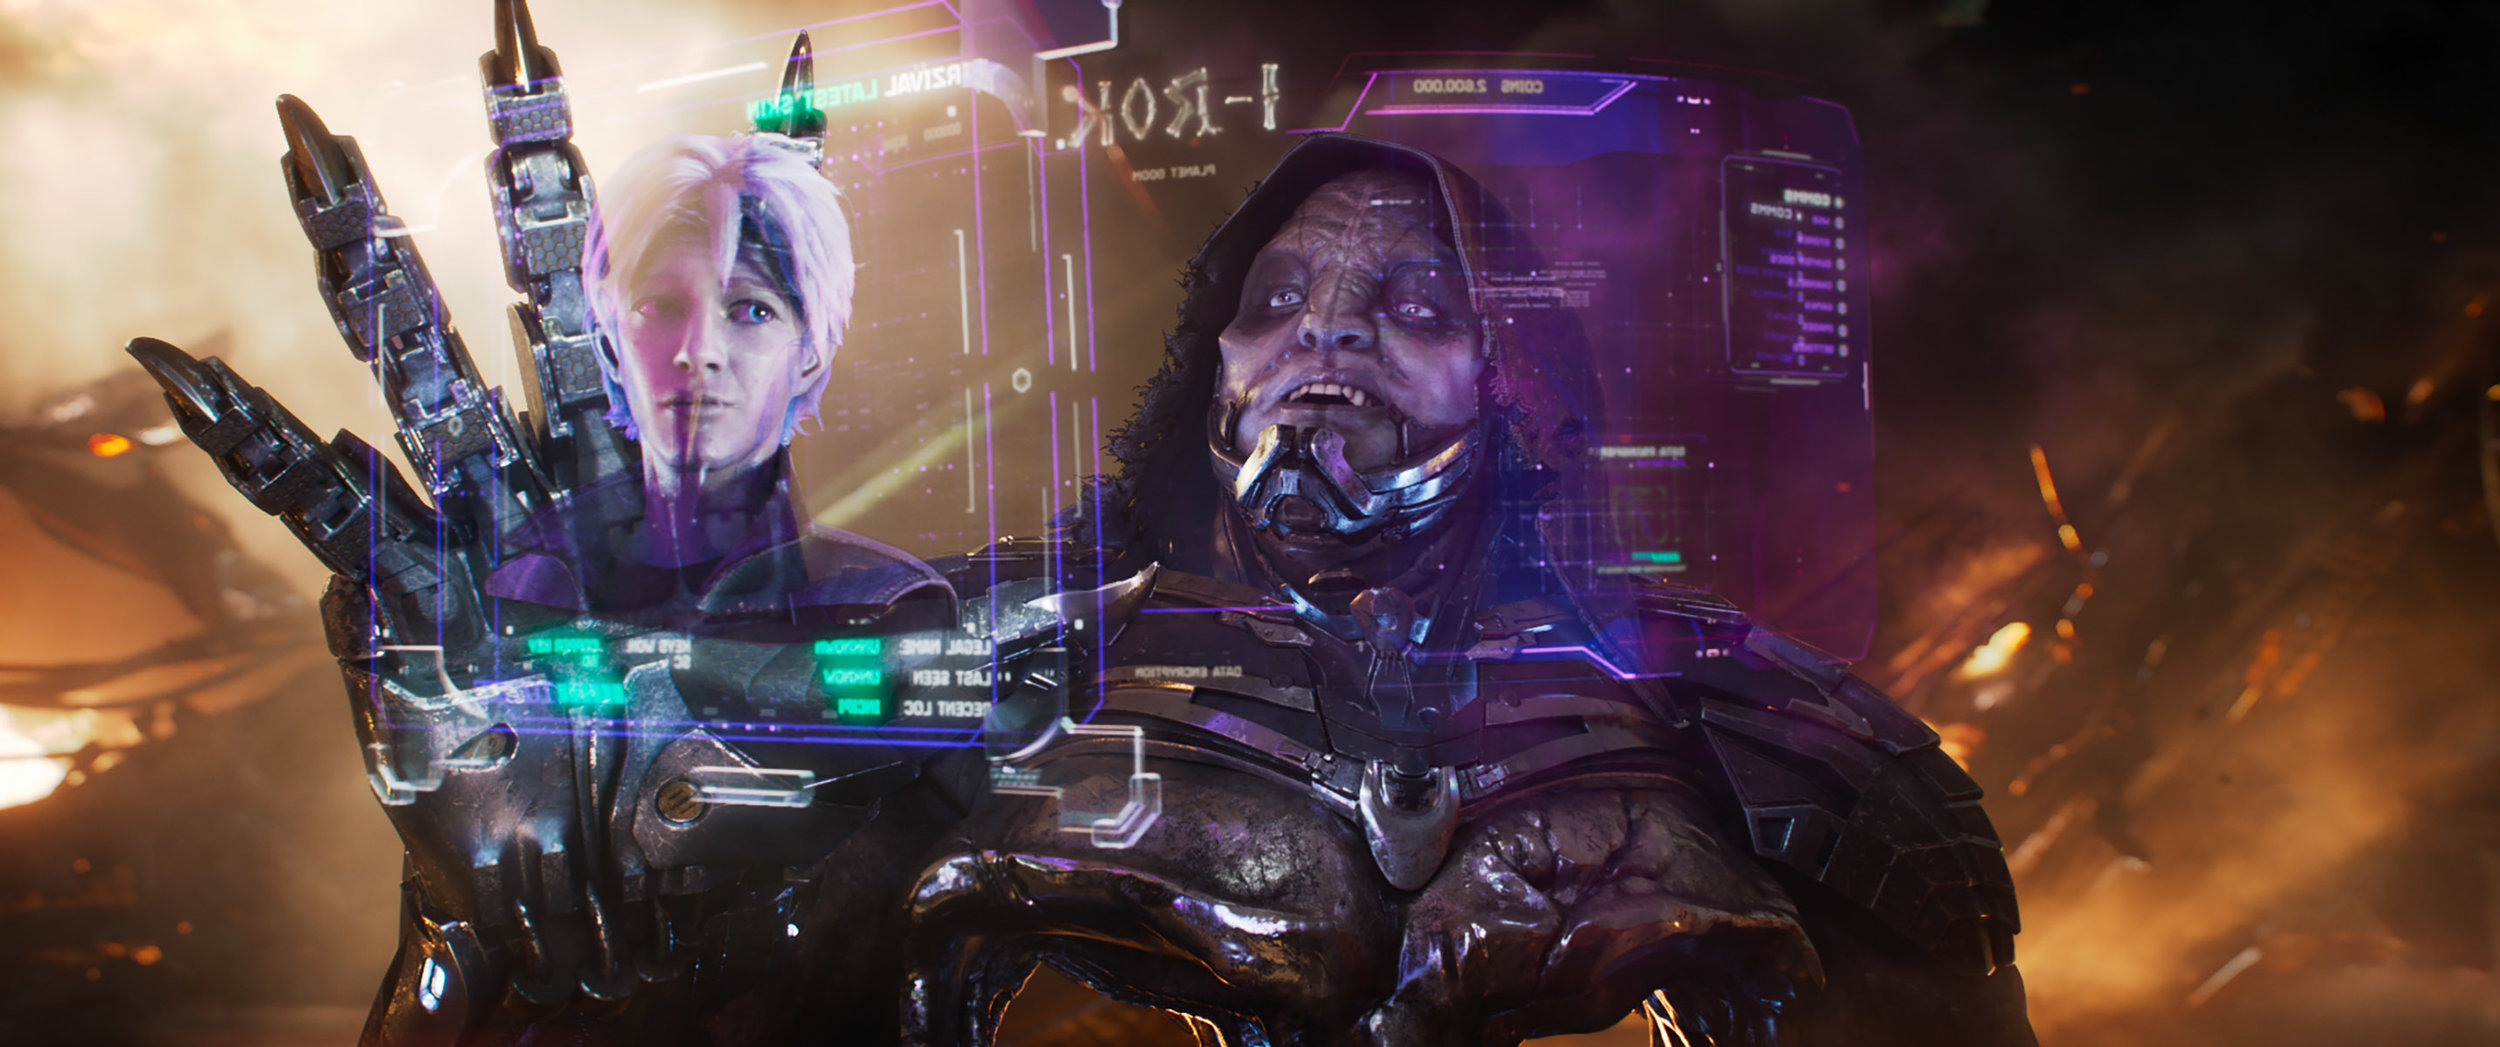 Ready Player One Character Posters Reveal the Avatars